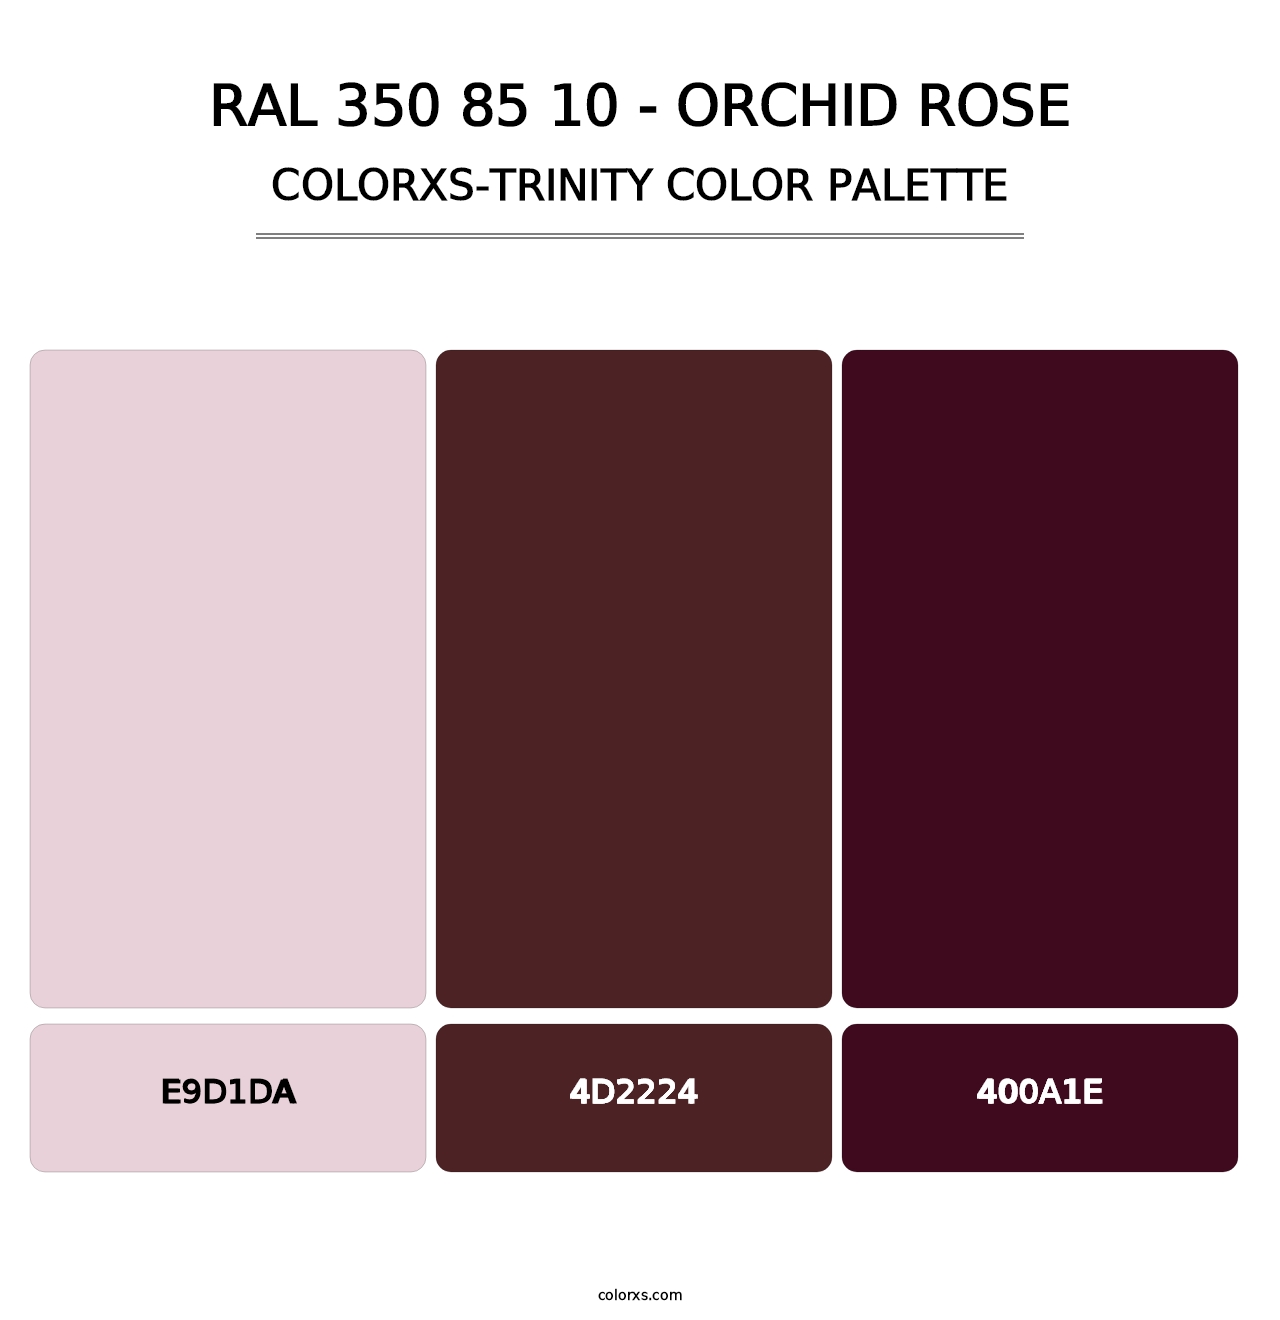 RAL 350 85 10 - Orchid Rose - Colorxs Trinity Palette